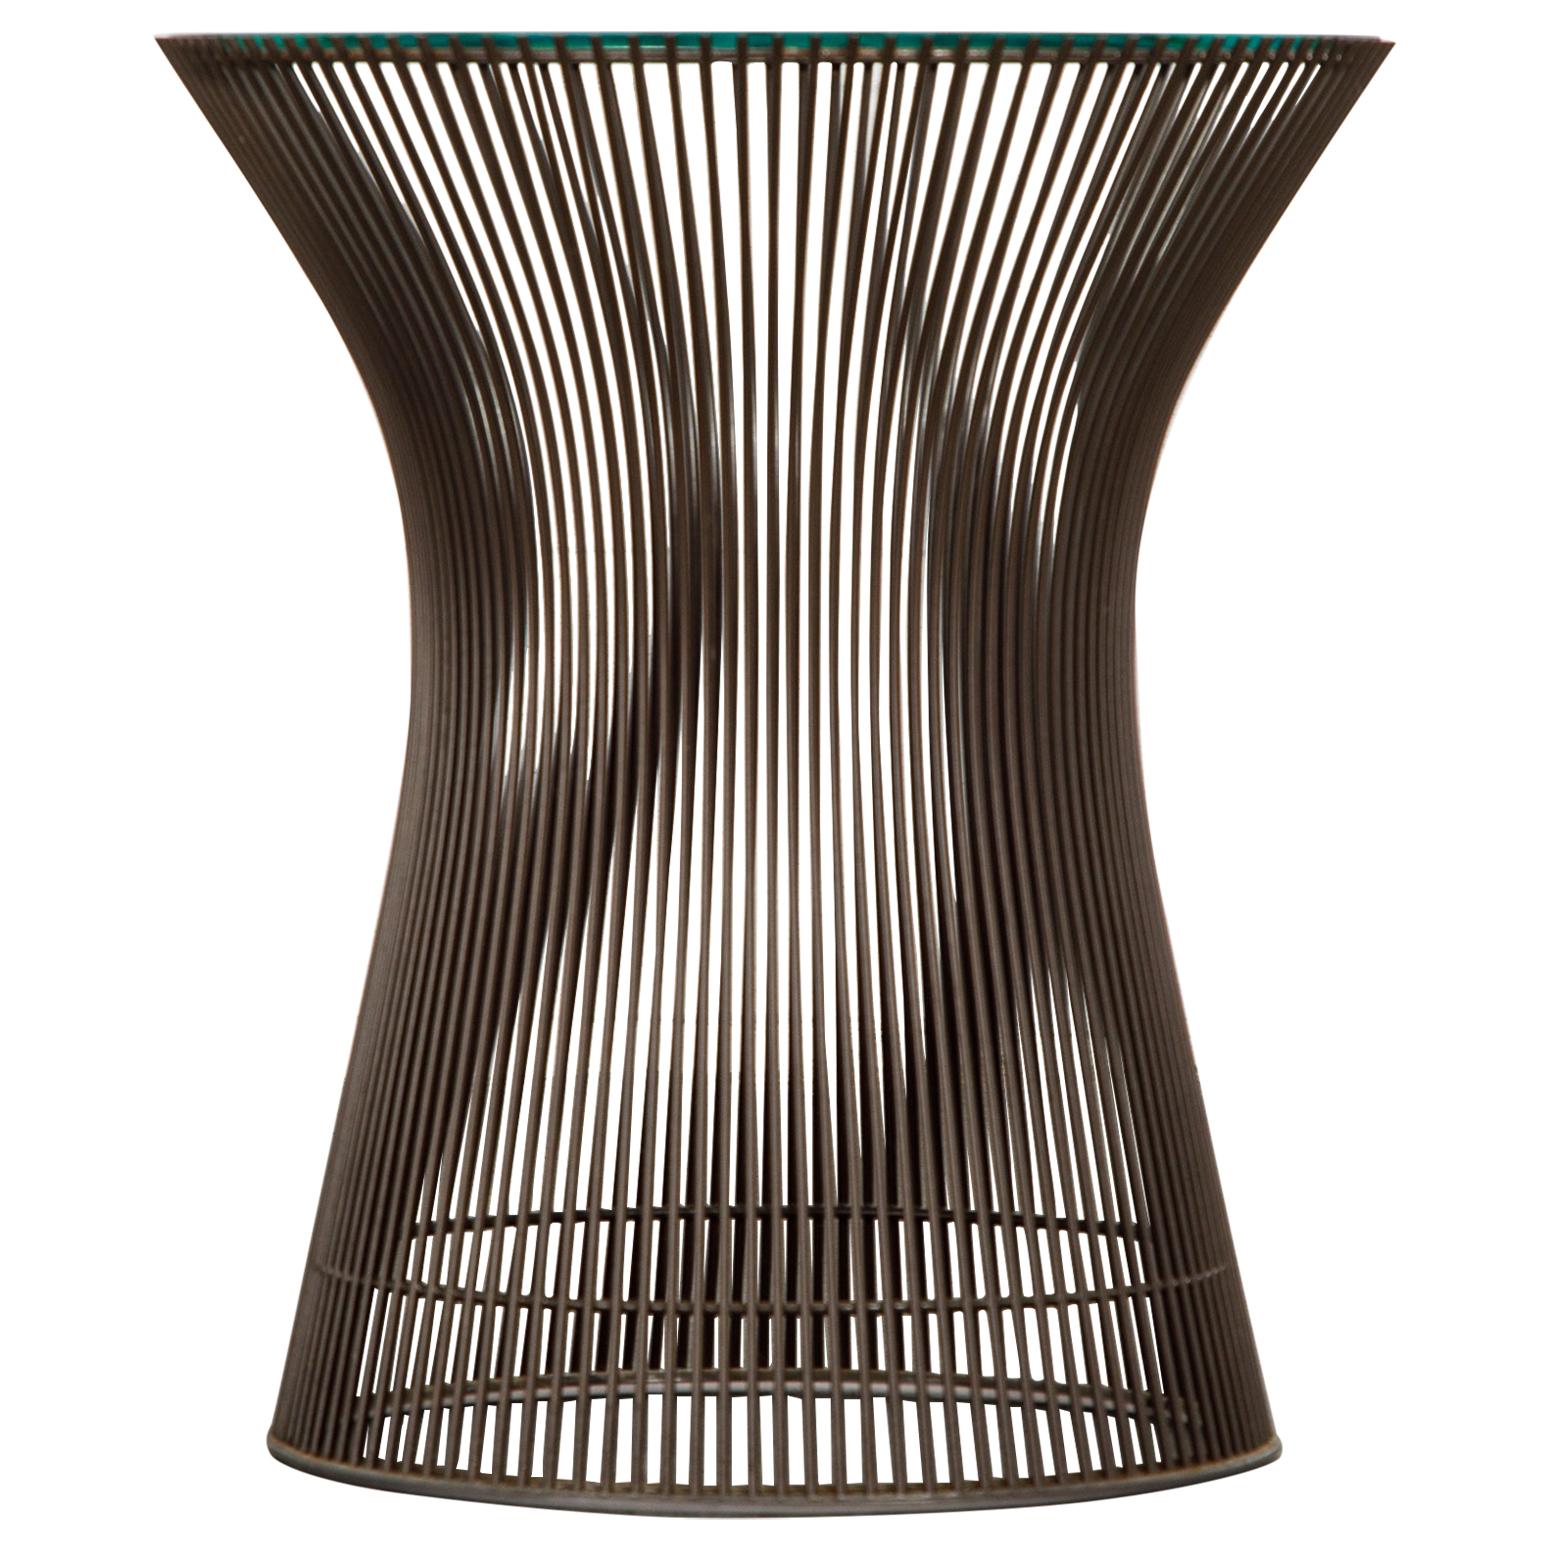 Bronze Wire Side Table by Warren Platner for Knoll International, circa 1968